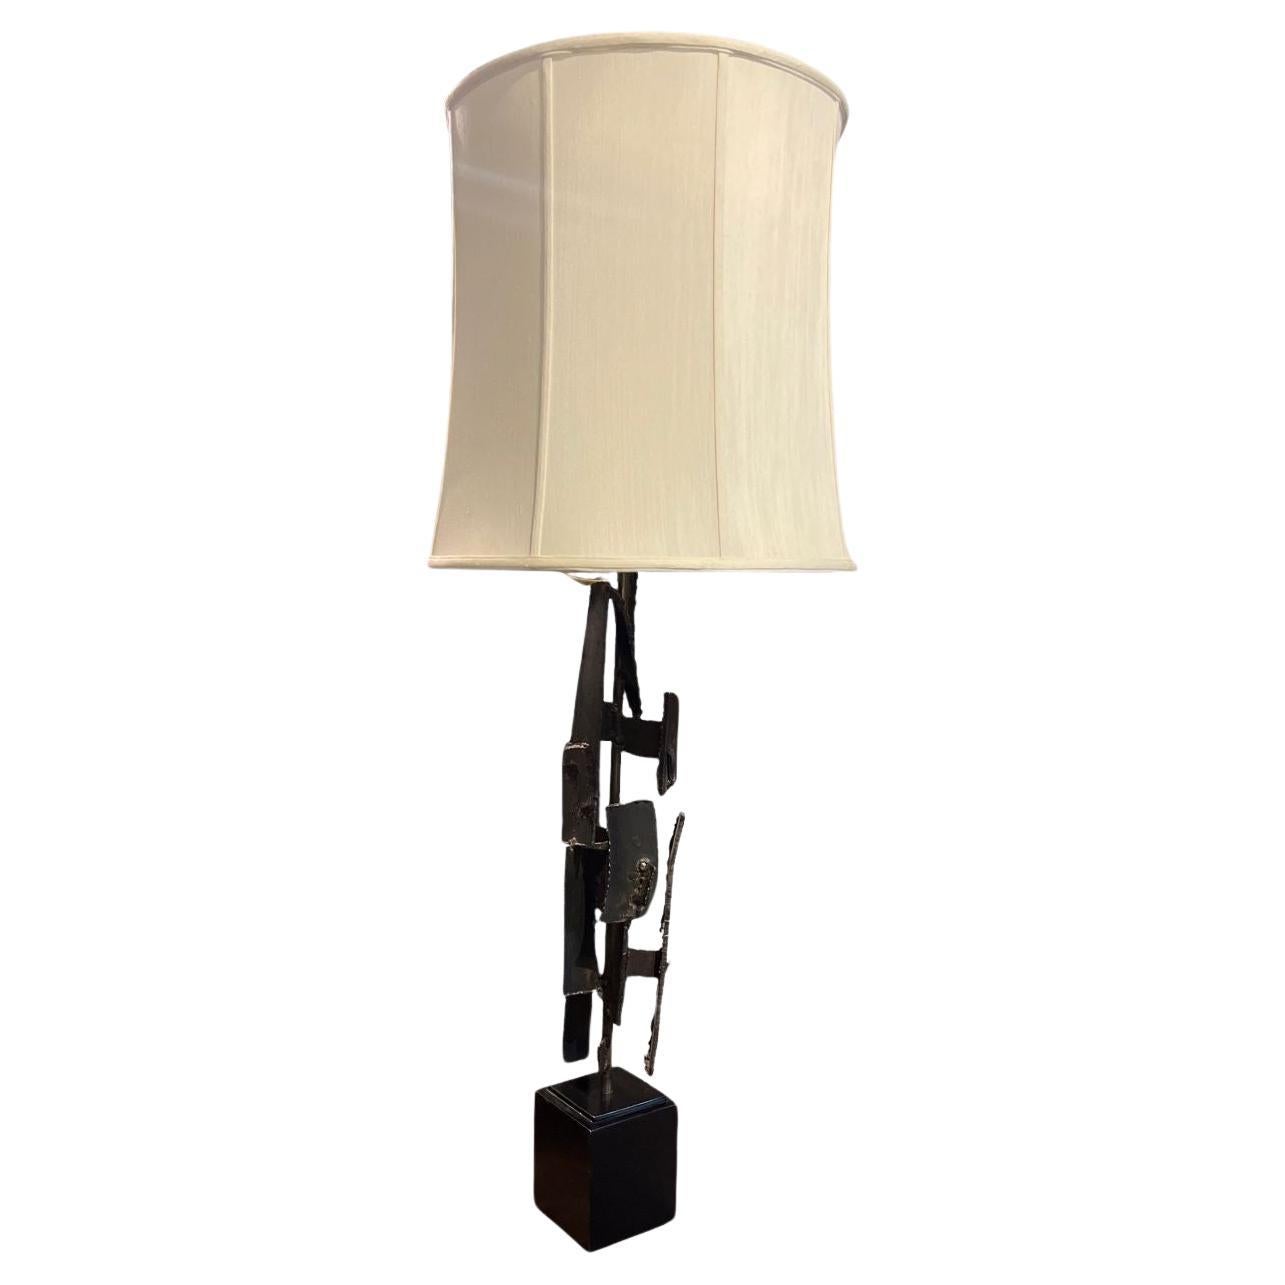 Stunning mid-century Brutalist lamp by Richard Barr for Laurel Lamp Company. A handsome large torch-cut iron table lamp, it is a Mid-Century Modern classic. Dimensions without shade 43 inches high, 5 by inches square. Dimensions with the shade 48